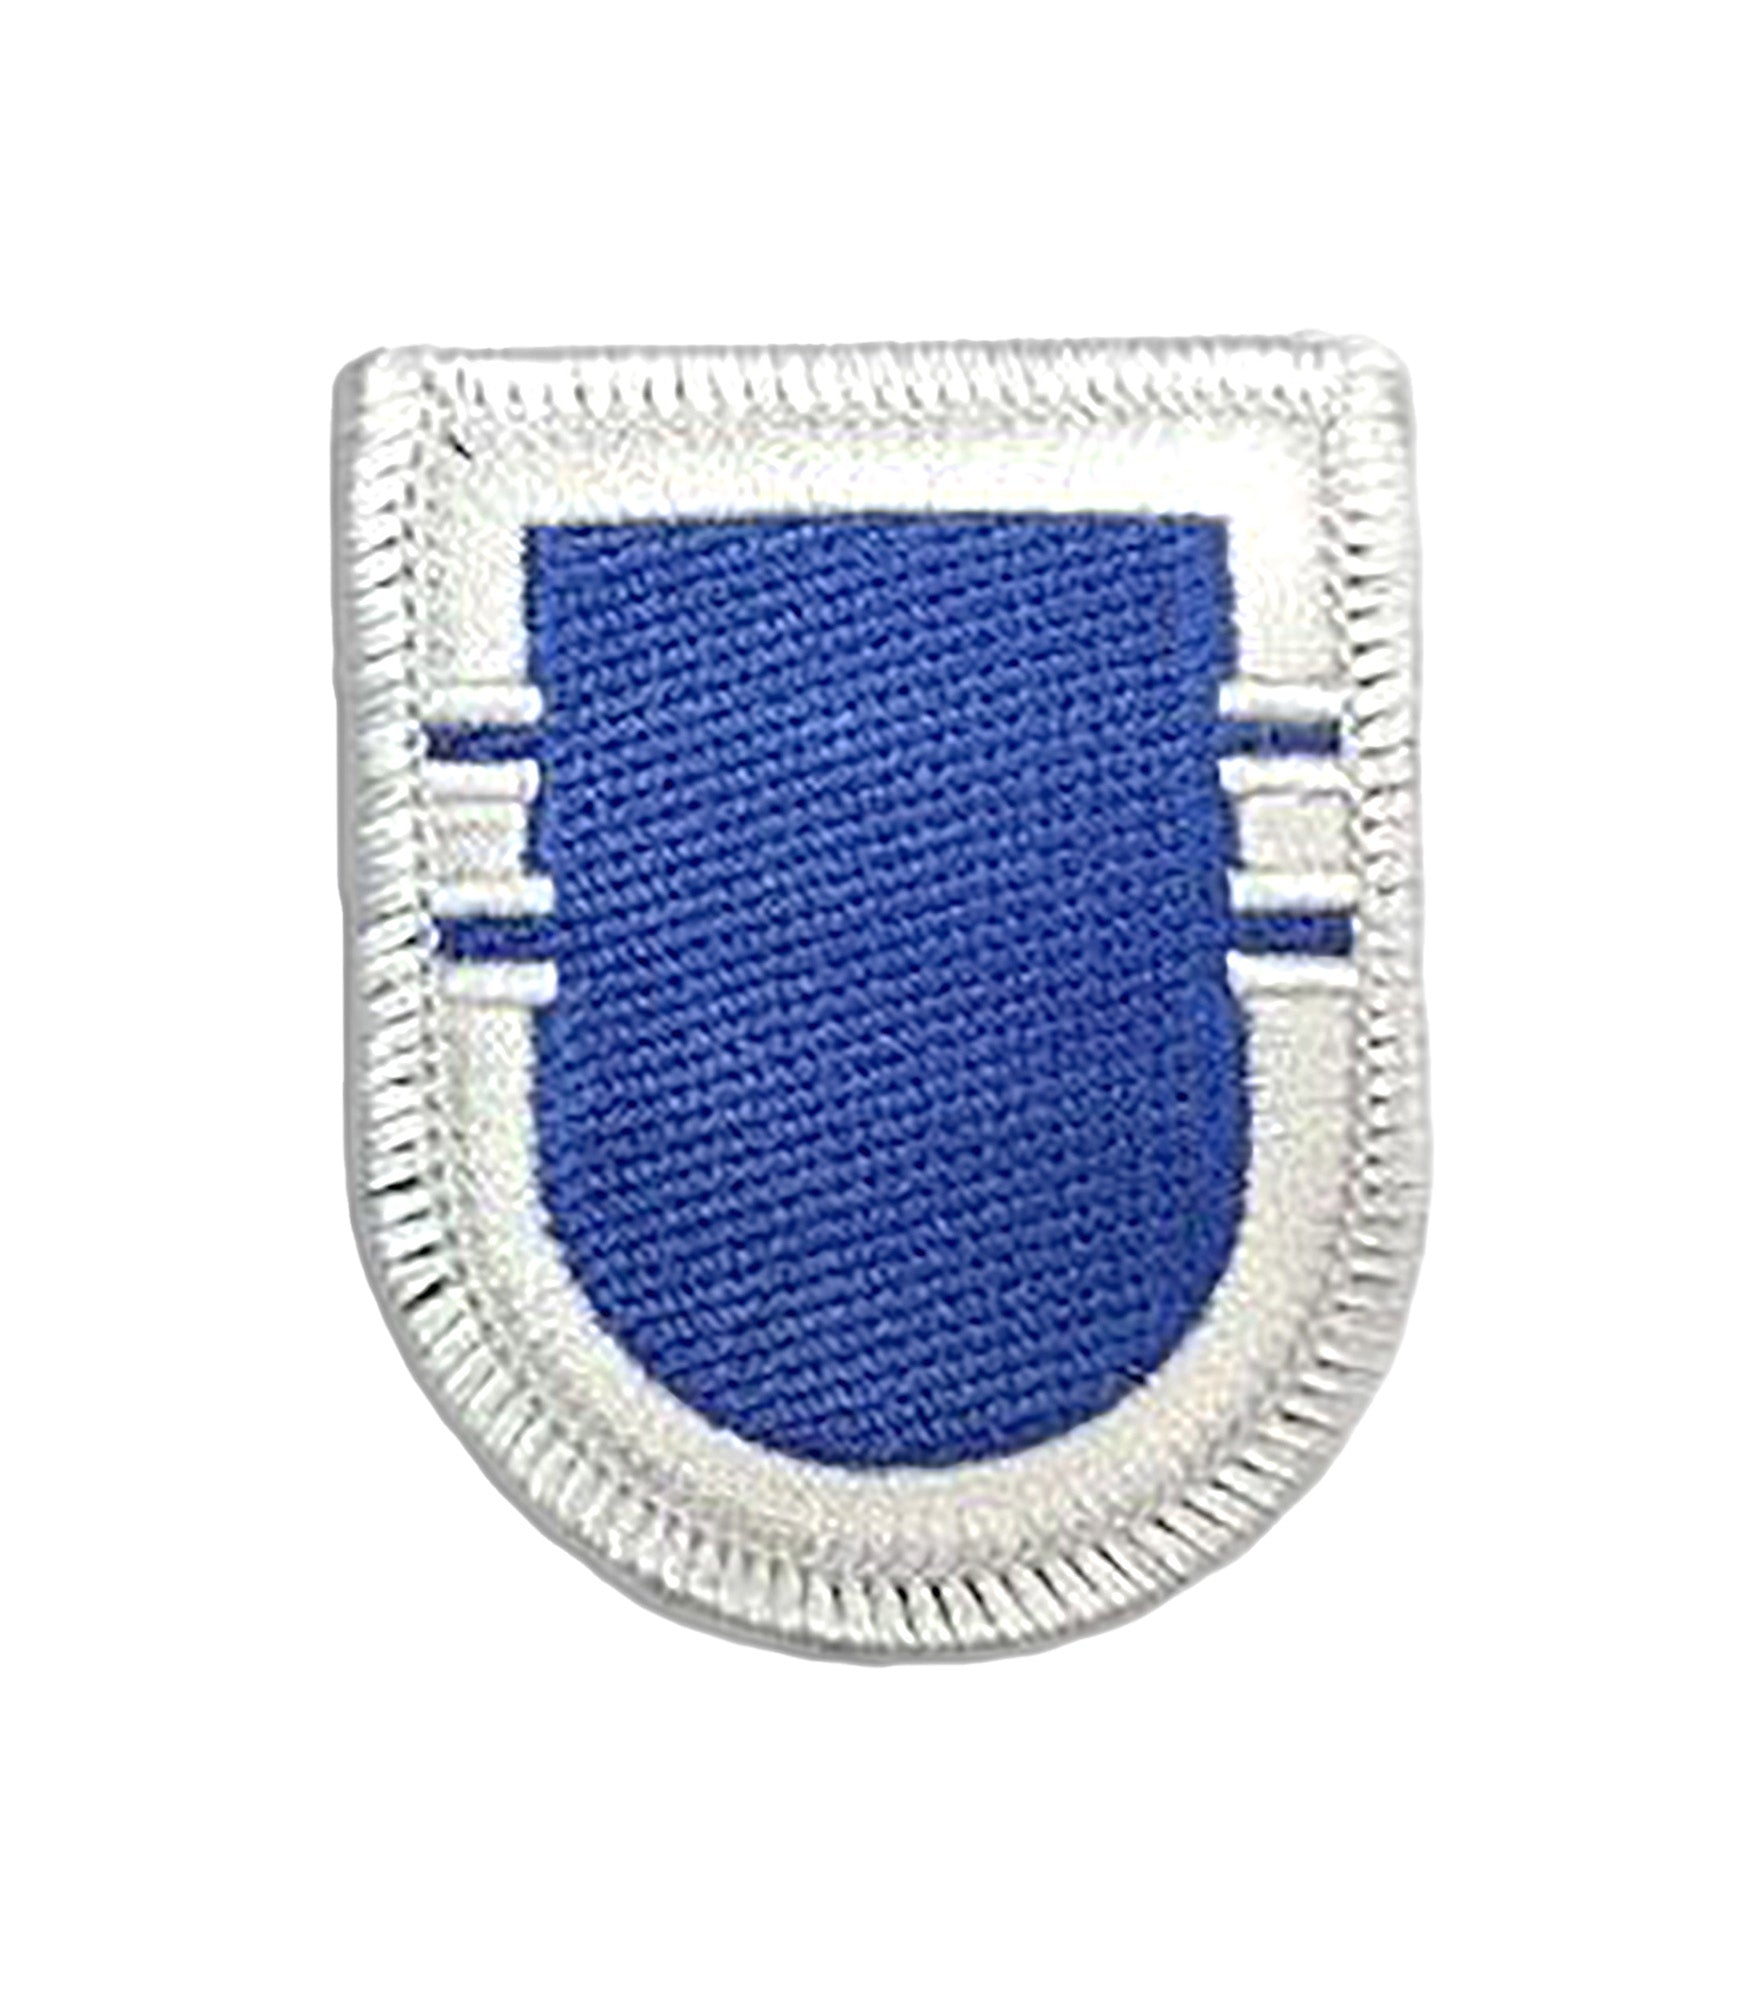 325th Infantry 2nd Battalion Flash - Insignia Depot